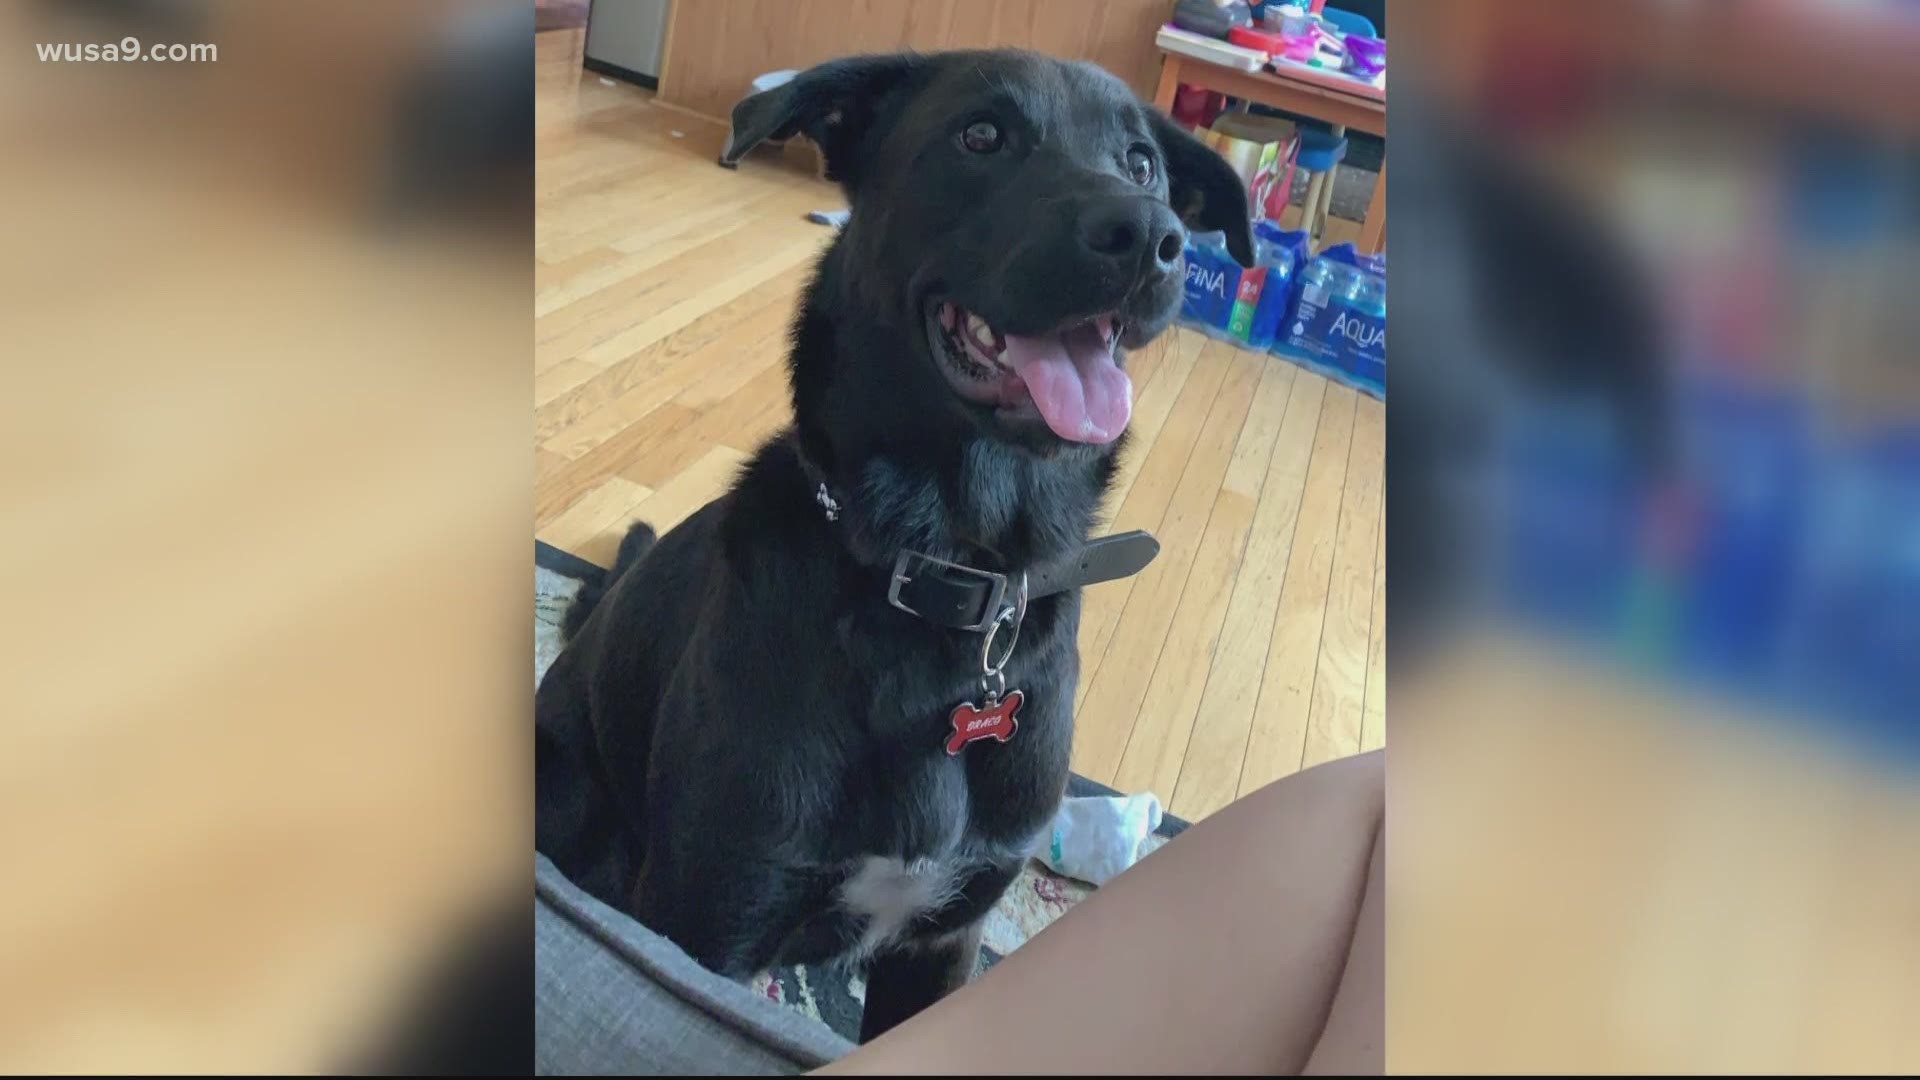 With a Fairfax County dog facing euthanization after being deemed "dangerous," a court order brought hope to supporters calling for the dog to be kept alive.